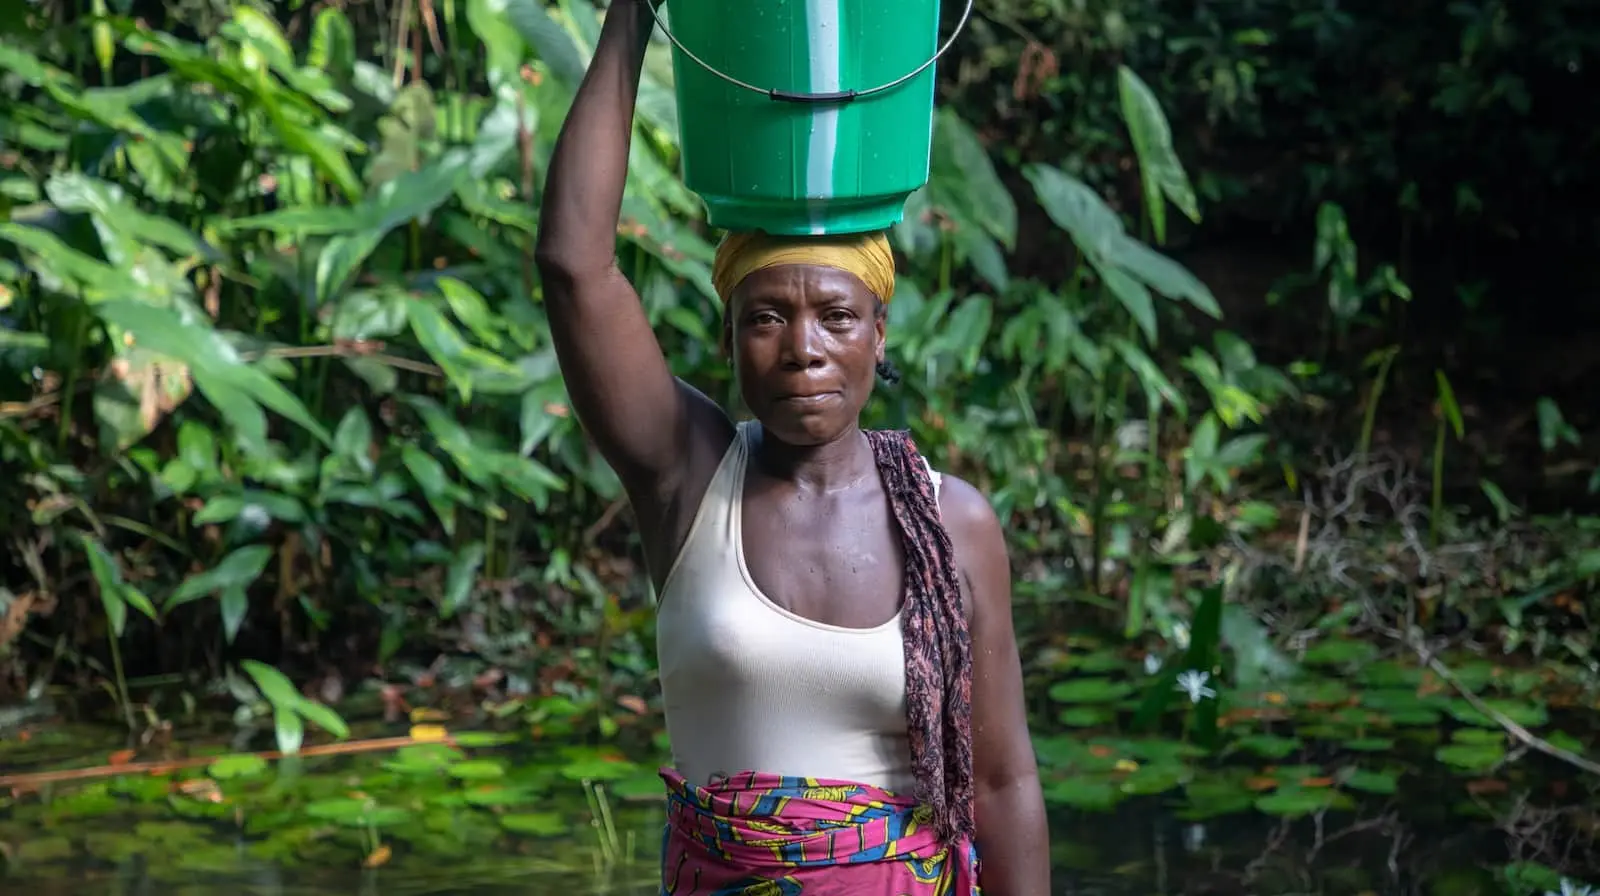 Woman standing in the water with a bucket on her head.